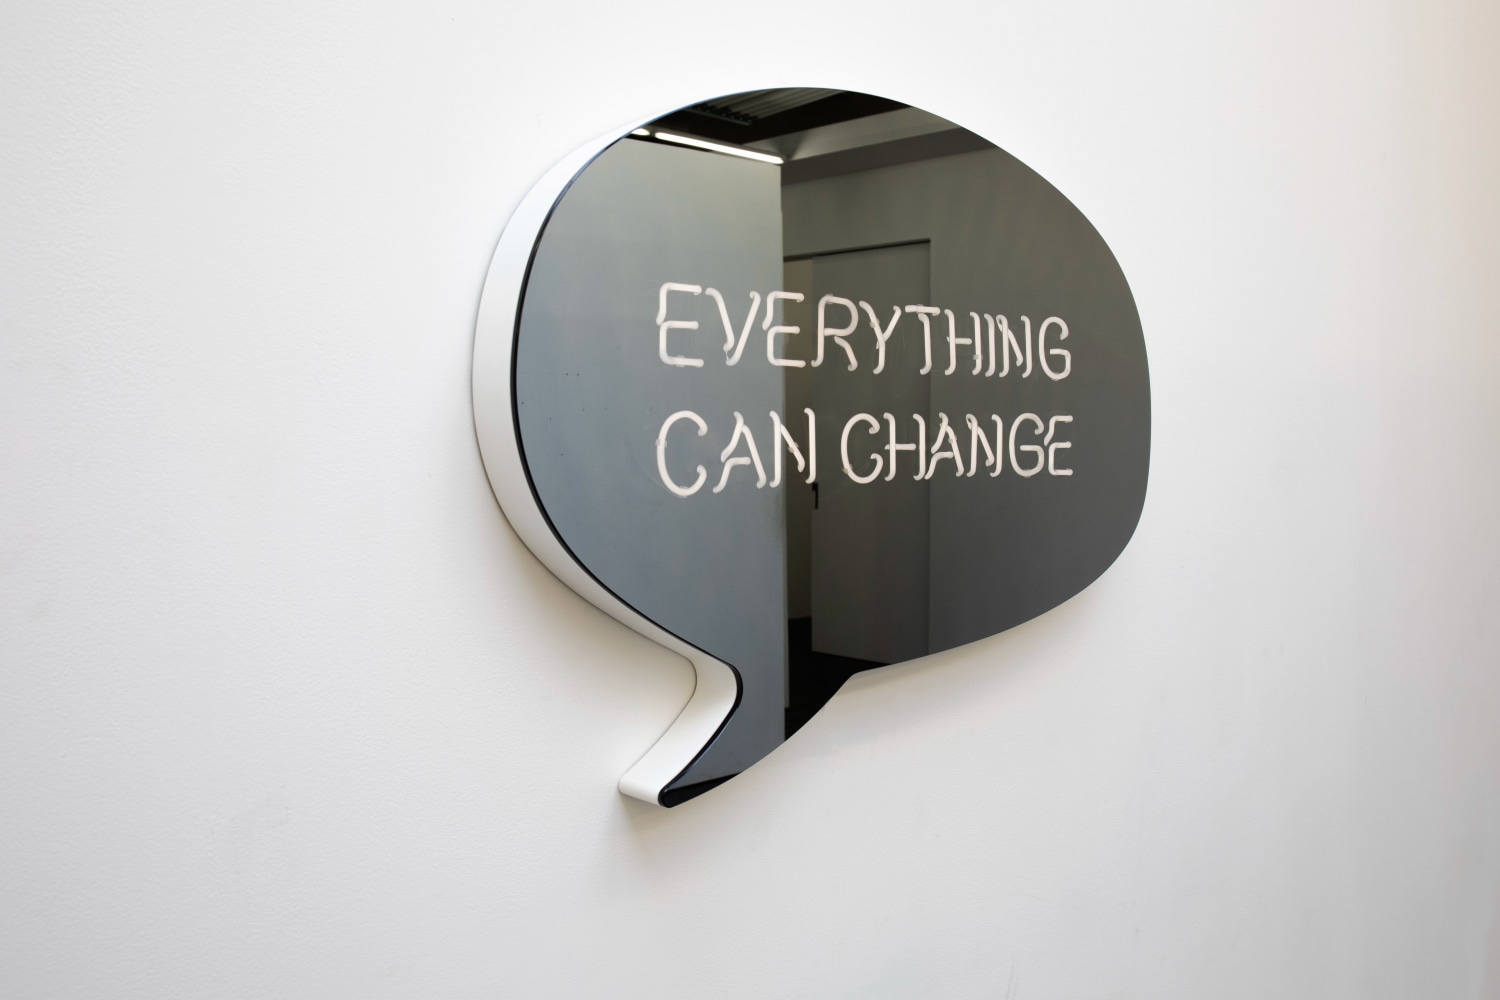 Jeppe Hein

EVERYTHING CAN CHANGE (speech bubble)

2021

Powder-coated aluminum, neon tubes, two-way mirror, powder-coated steel, transformers

29 1/8 x 42 1/8 x 2 3/4 inches (74 x 107 x 7 cm)

Edition of 3, with 2AP

JH 603

&amp;nbsp;

INQUIRE